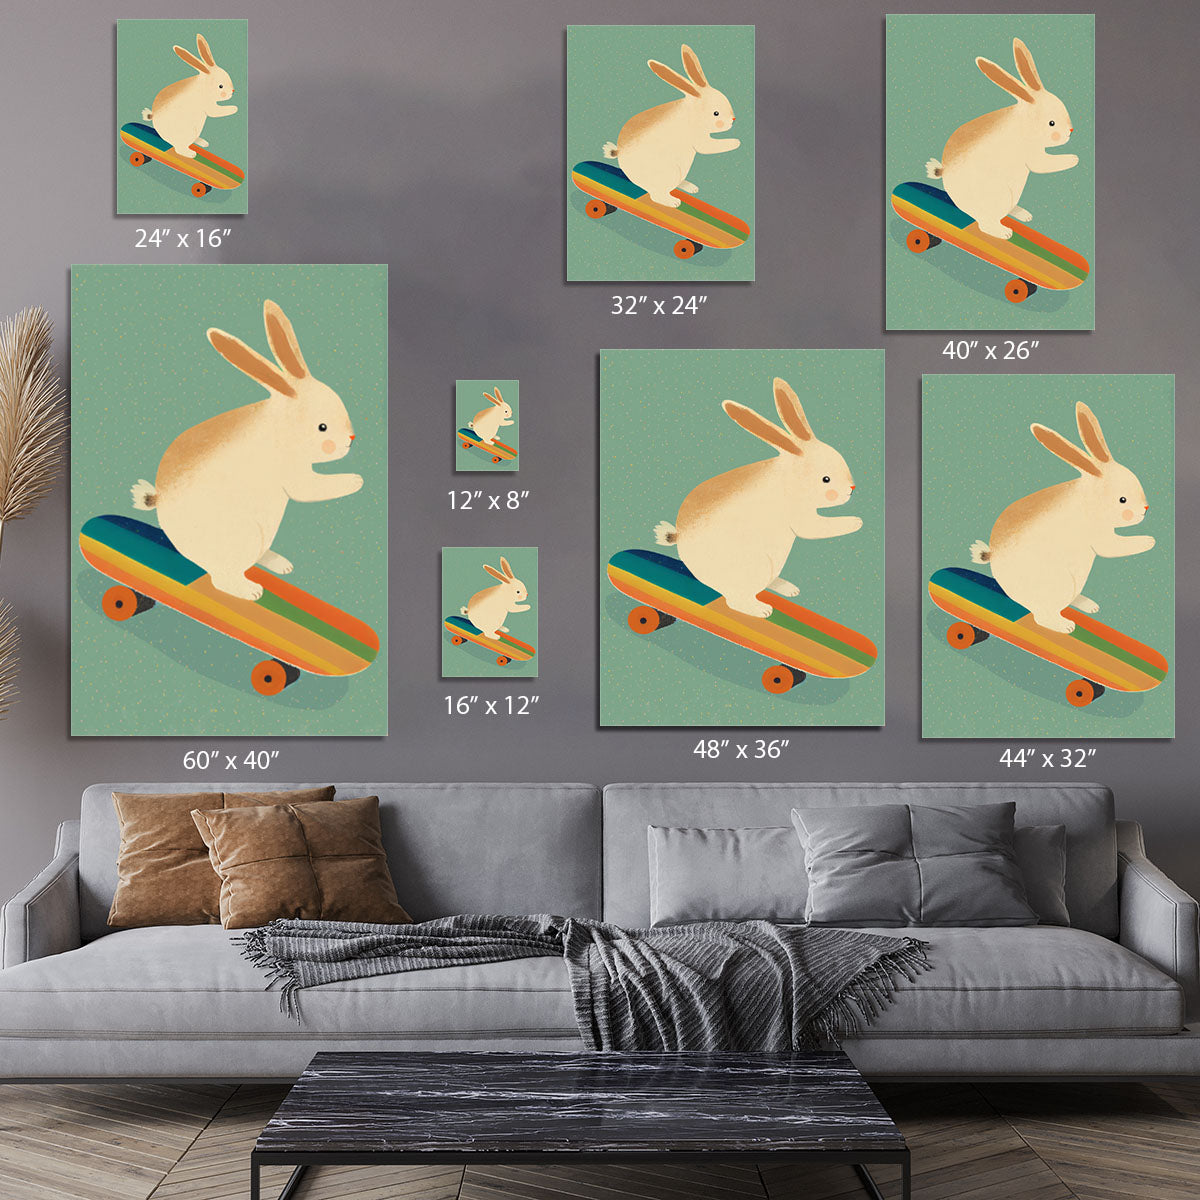 Bunny On Skateboard Canvas Print or Poster - 1x - 7